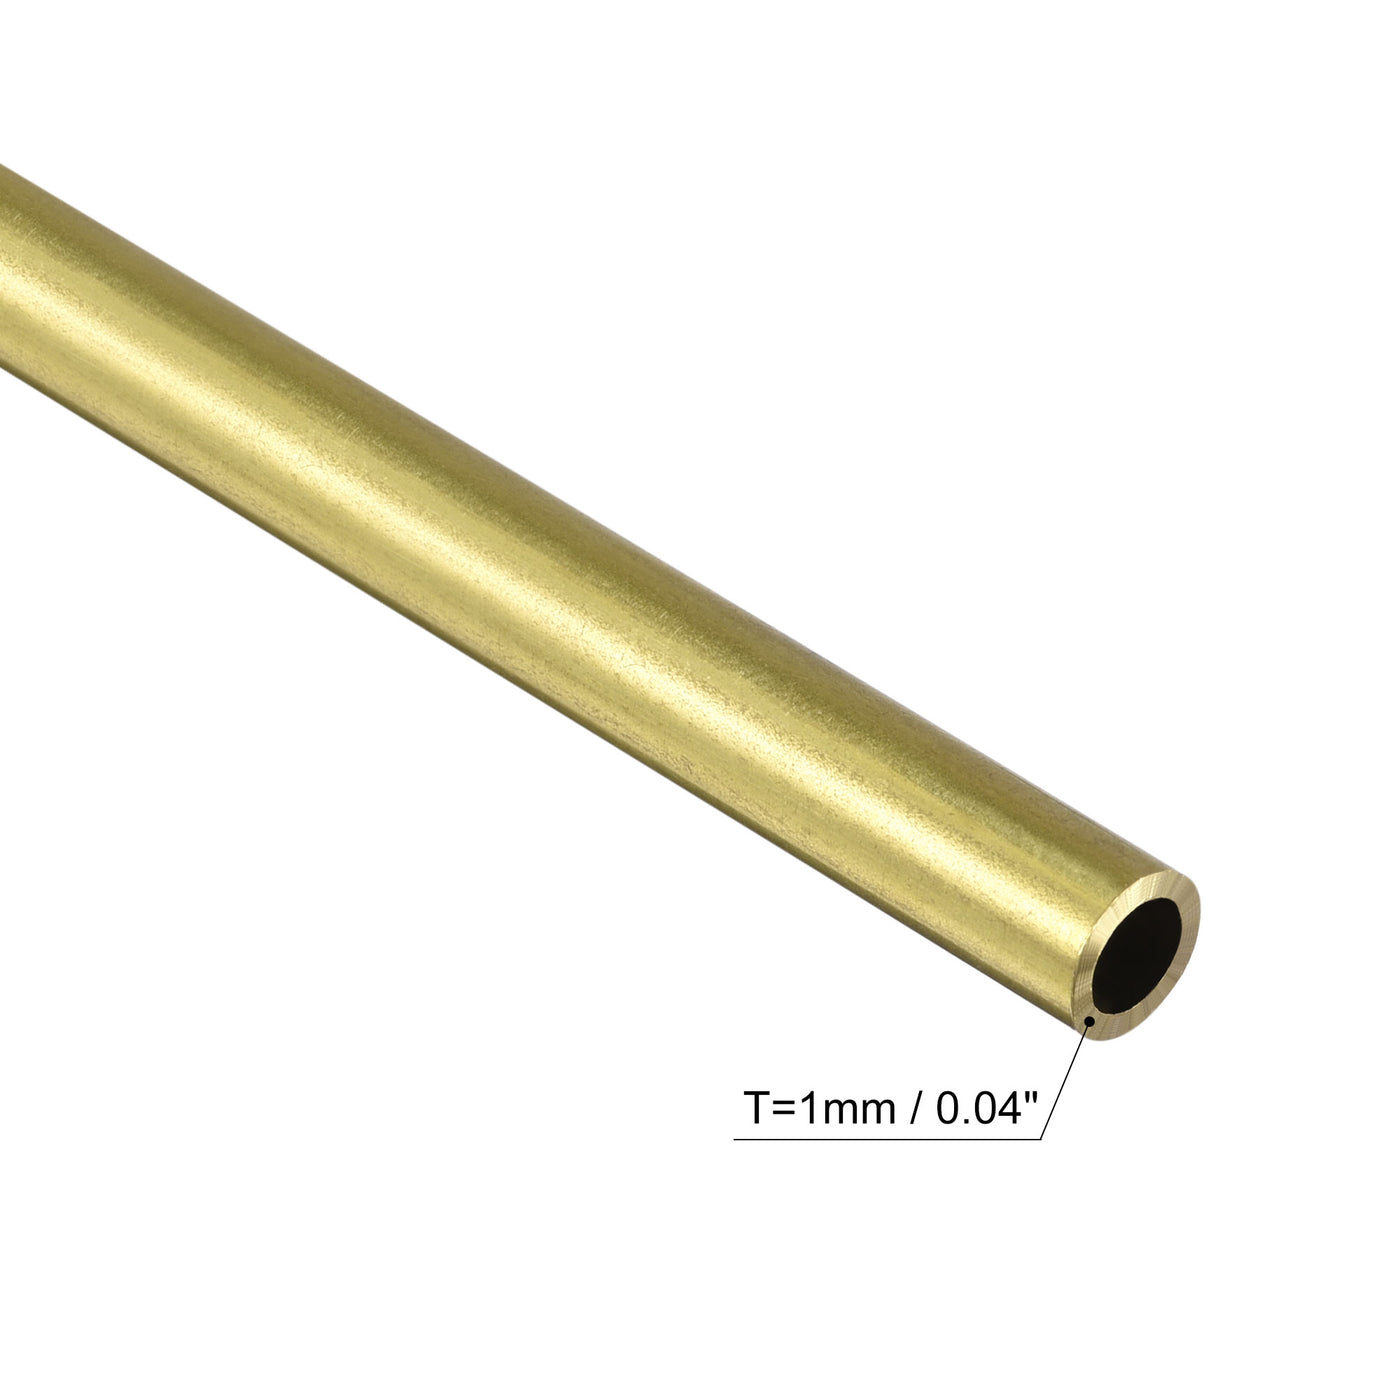 uxcell Uxcell 2Pcs 5mm x 1mm x 400mm Seamless Straight Brass Tube for Industry DIY Projects